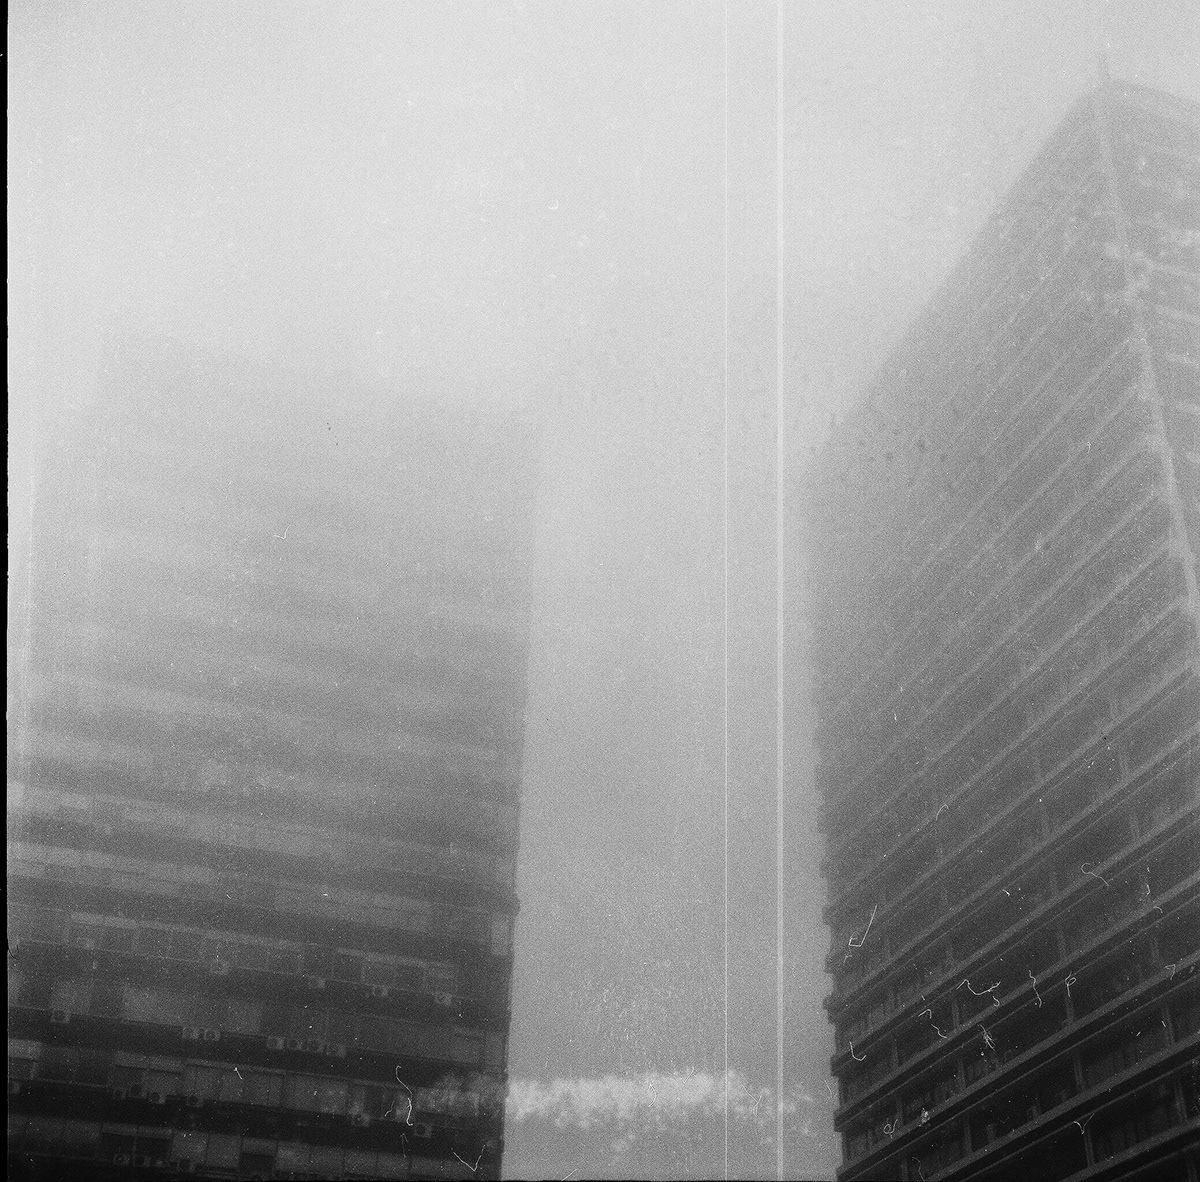 Image may contain: fog, black and white and skyscraper